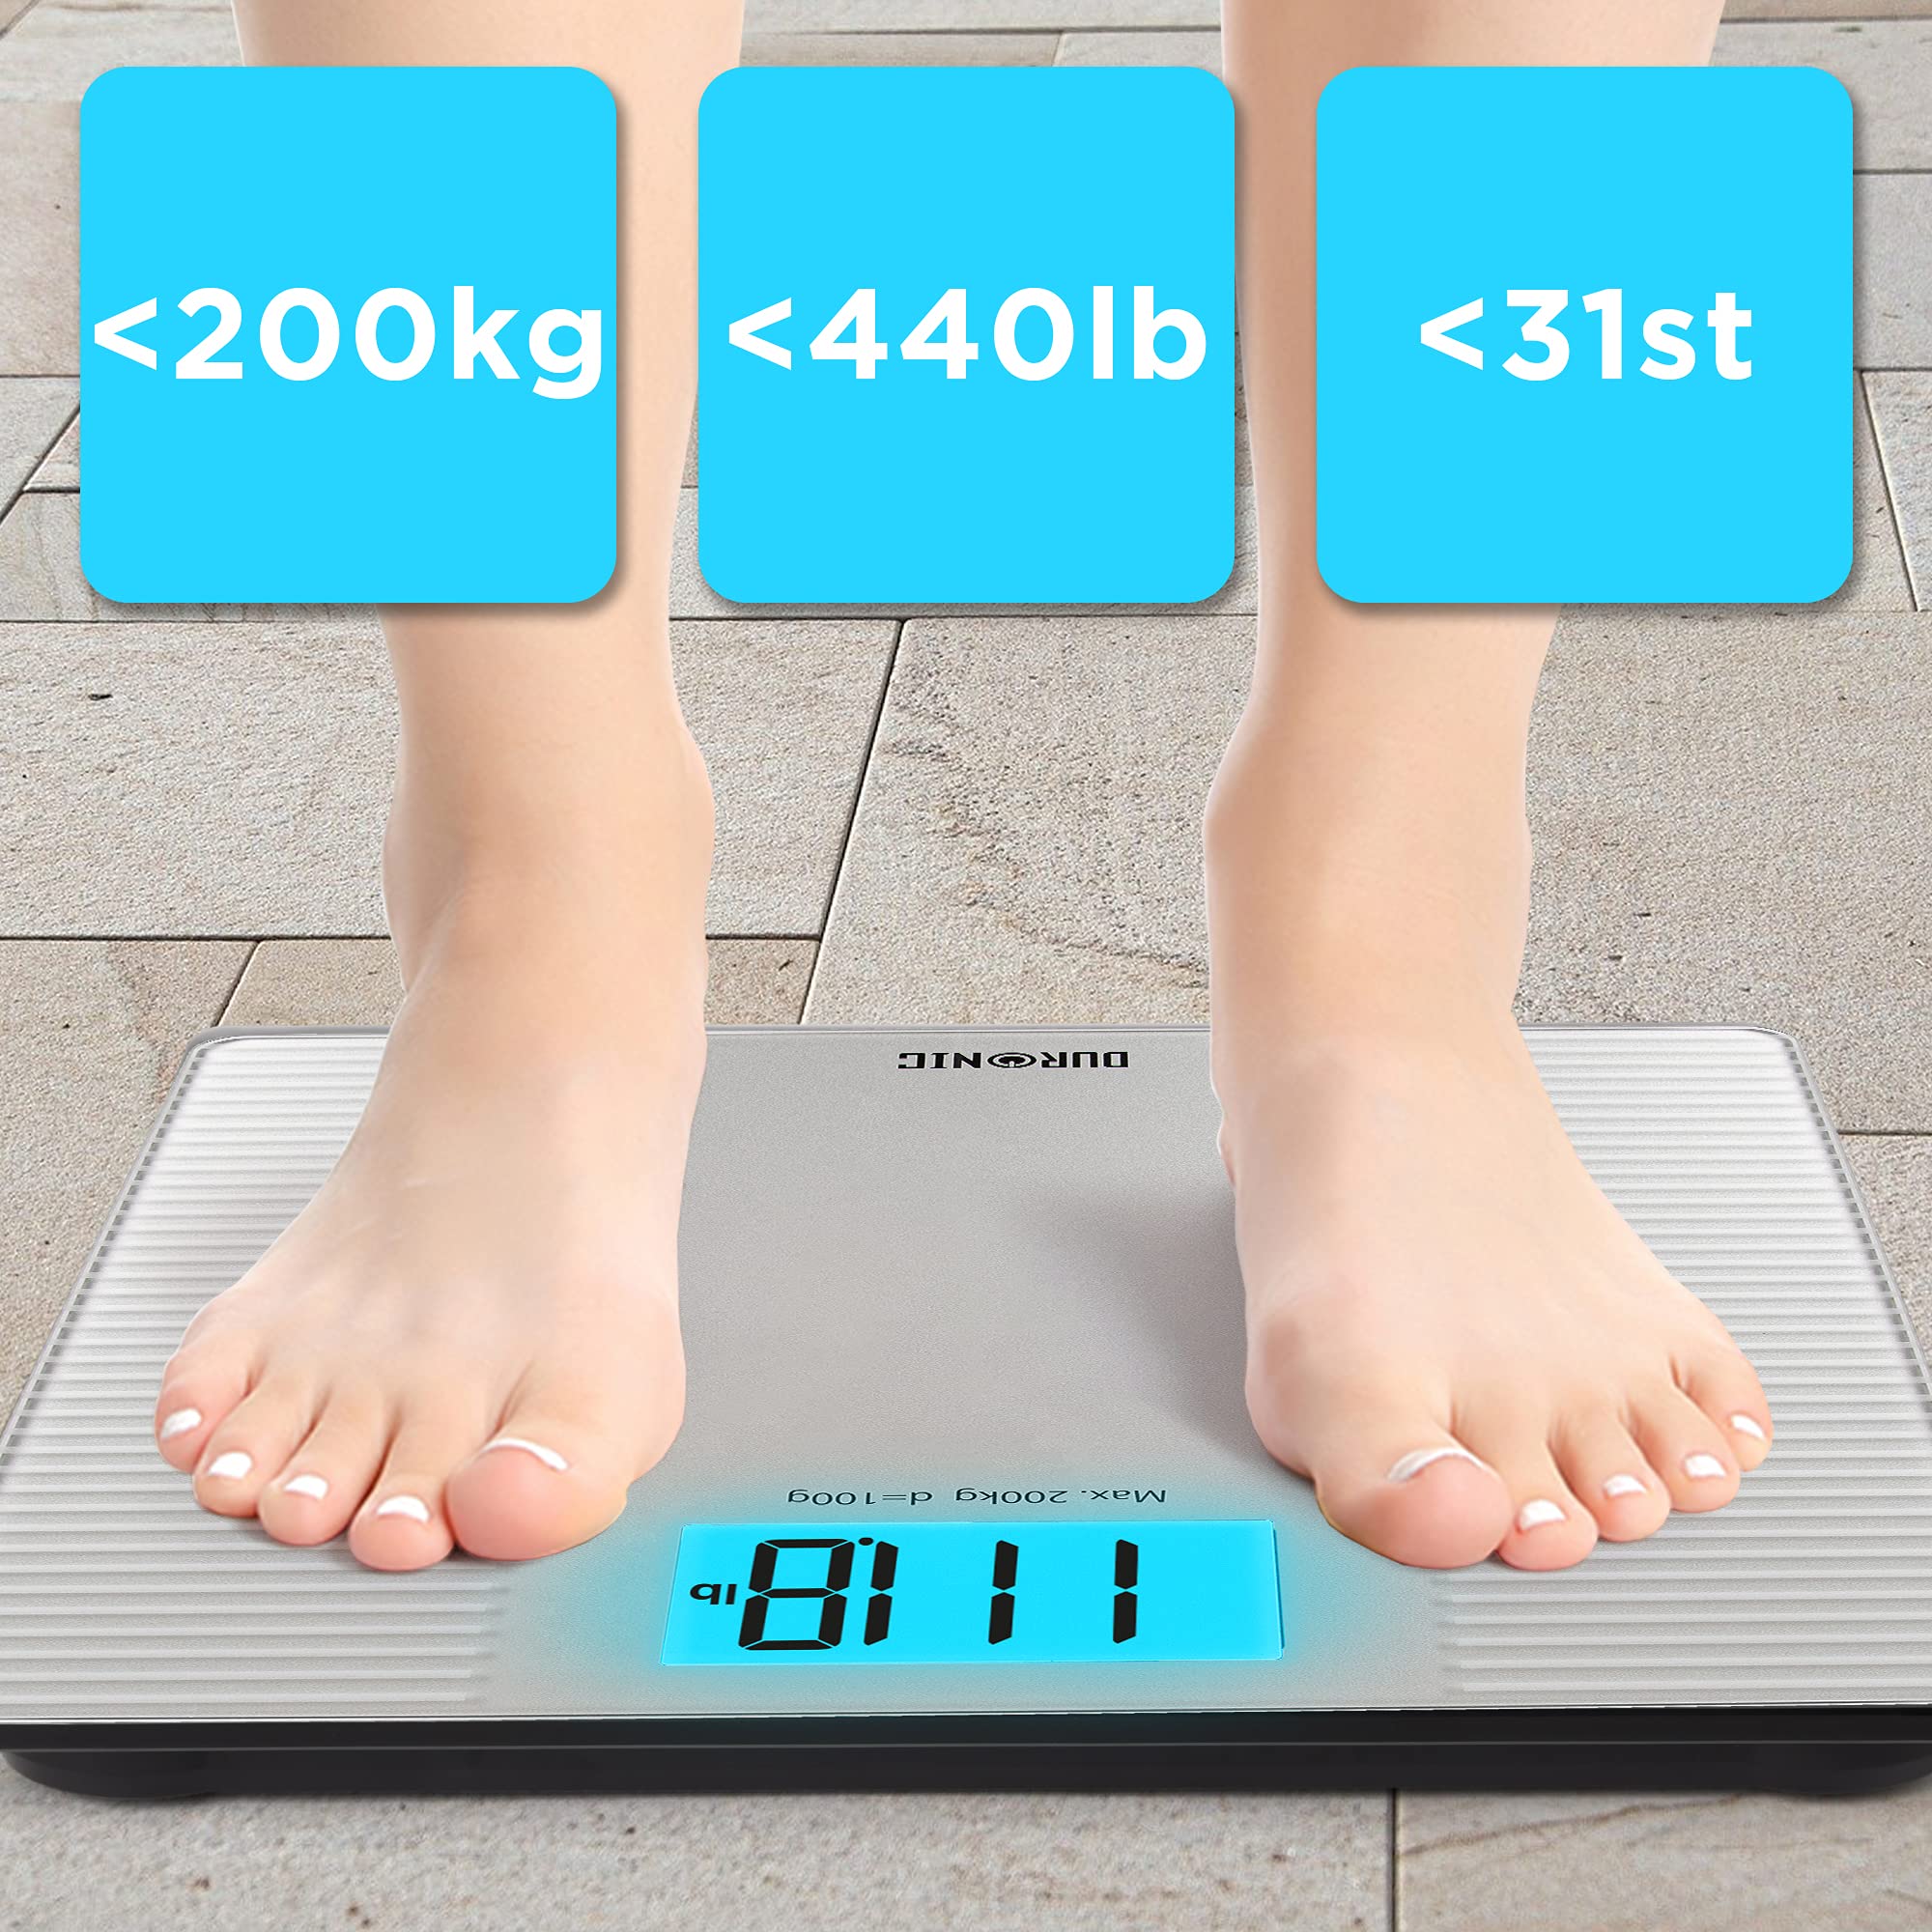 Duronic Body Scales BS203 SR | Measures Body Weight in Kilograms, Pounds & Stones | Silver Non-Slip Design | Step-On Activation Bathroom Scales | Precision Sensors | XL Digital Display | 200kg Capacity